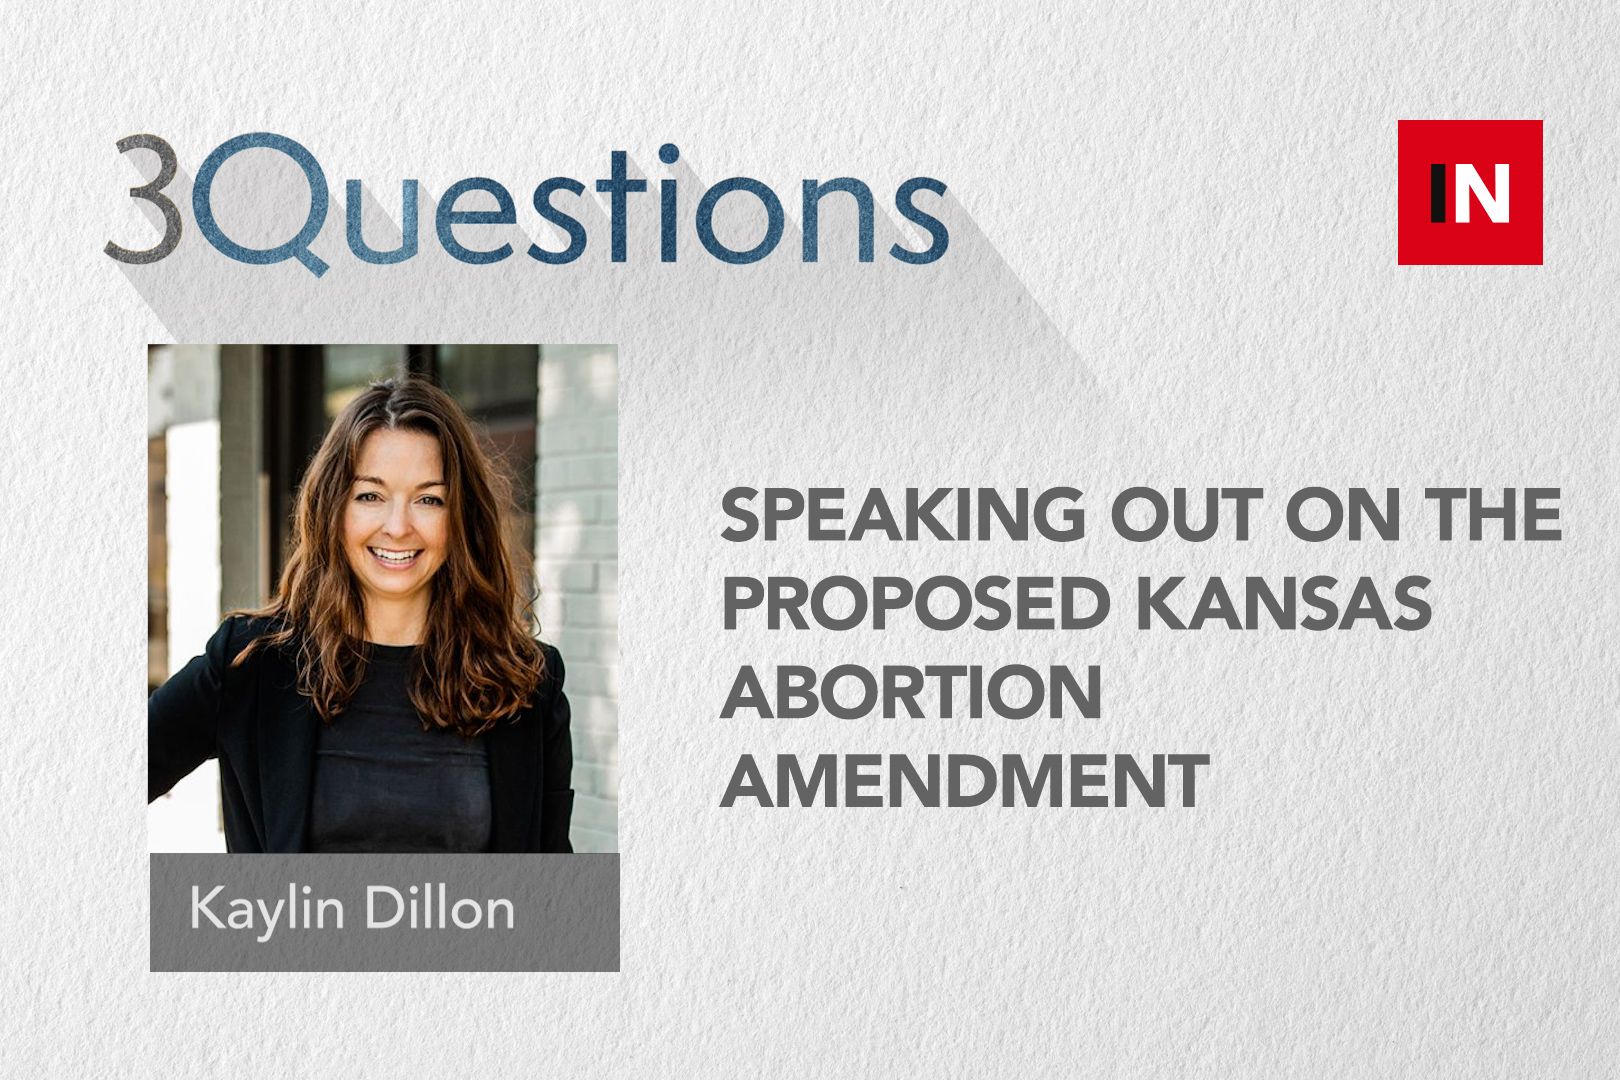 Speaking out on the proposed Kansas abortion amendment